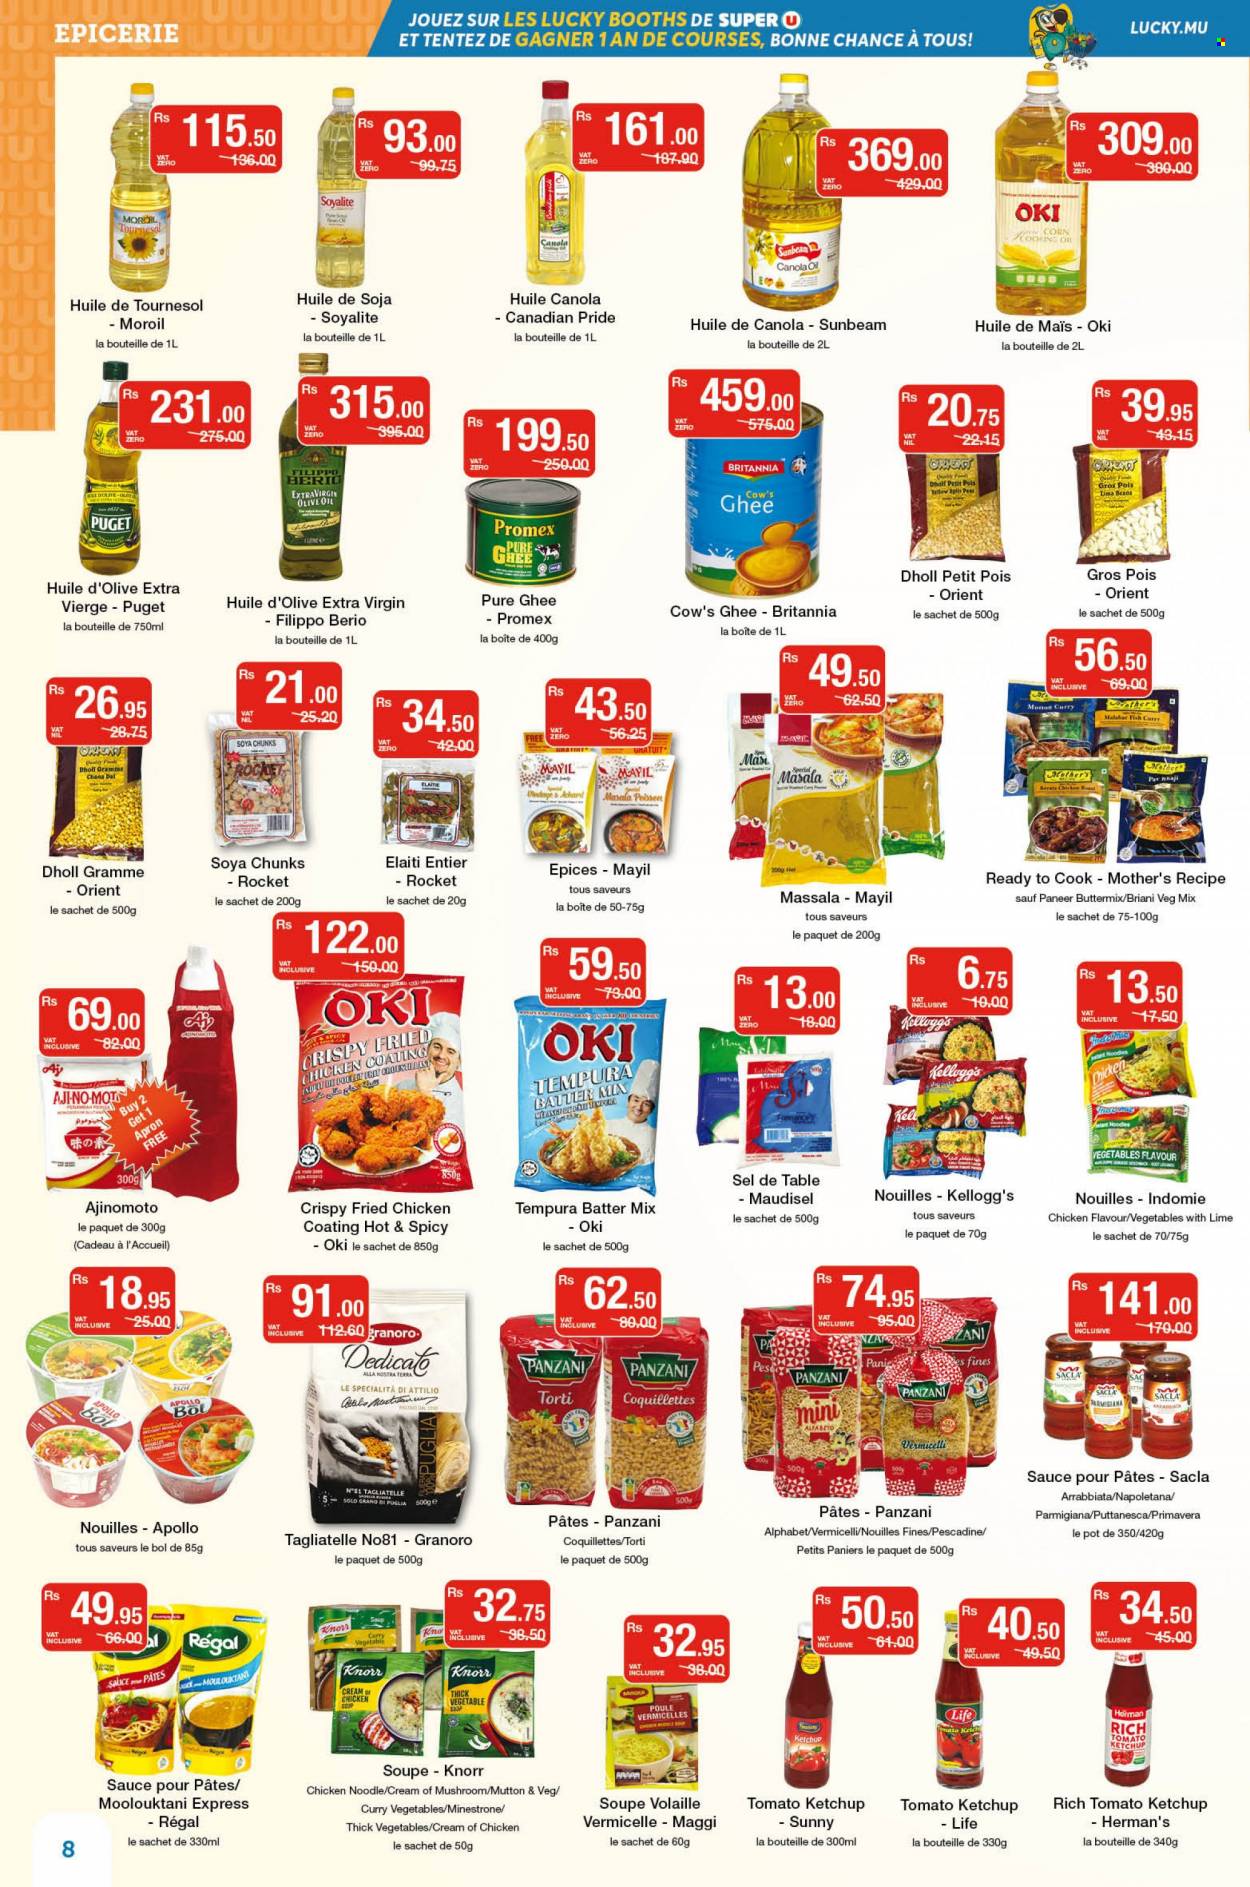 thumbnail - Super U Catalogue - 23.09.2022 - 6.10.2022 - Sales products - sauce, fried chicken, noodles, paneer, ghee, parmigiana, Kellogg's, Maggi, soya chunks, extra virgin olive oil, olive oil, oil, mutton meat, pot, Sunbeam, ketchup, Knorr. Page 8.